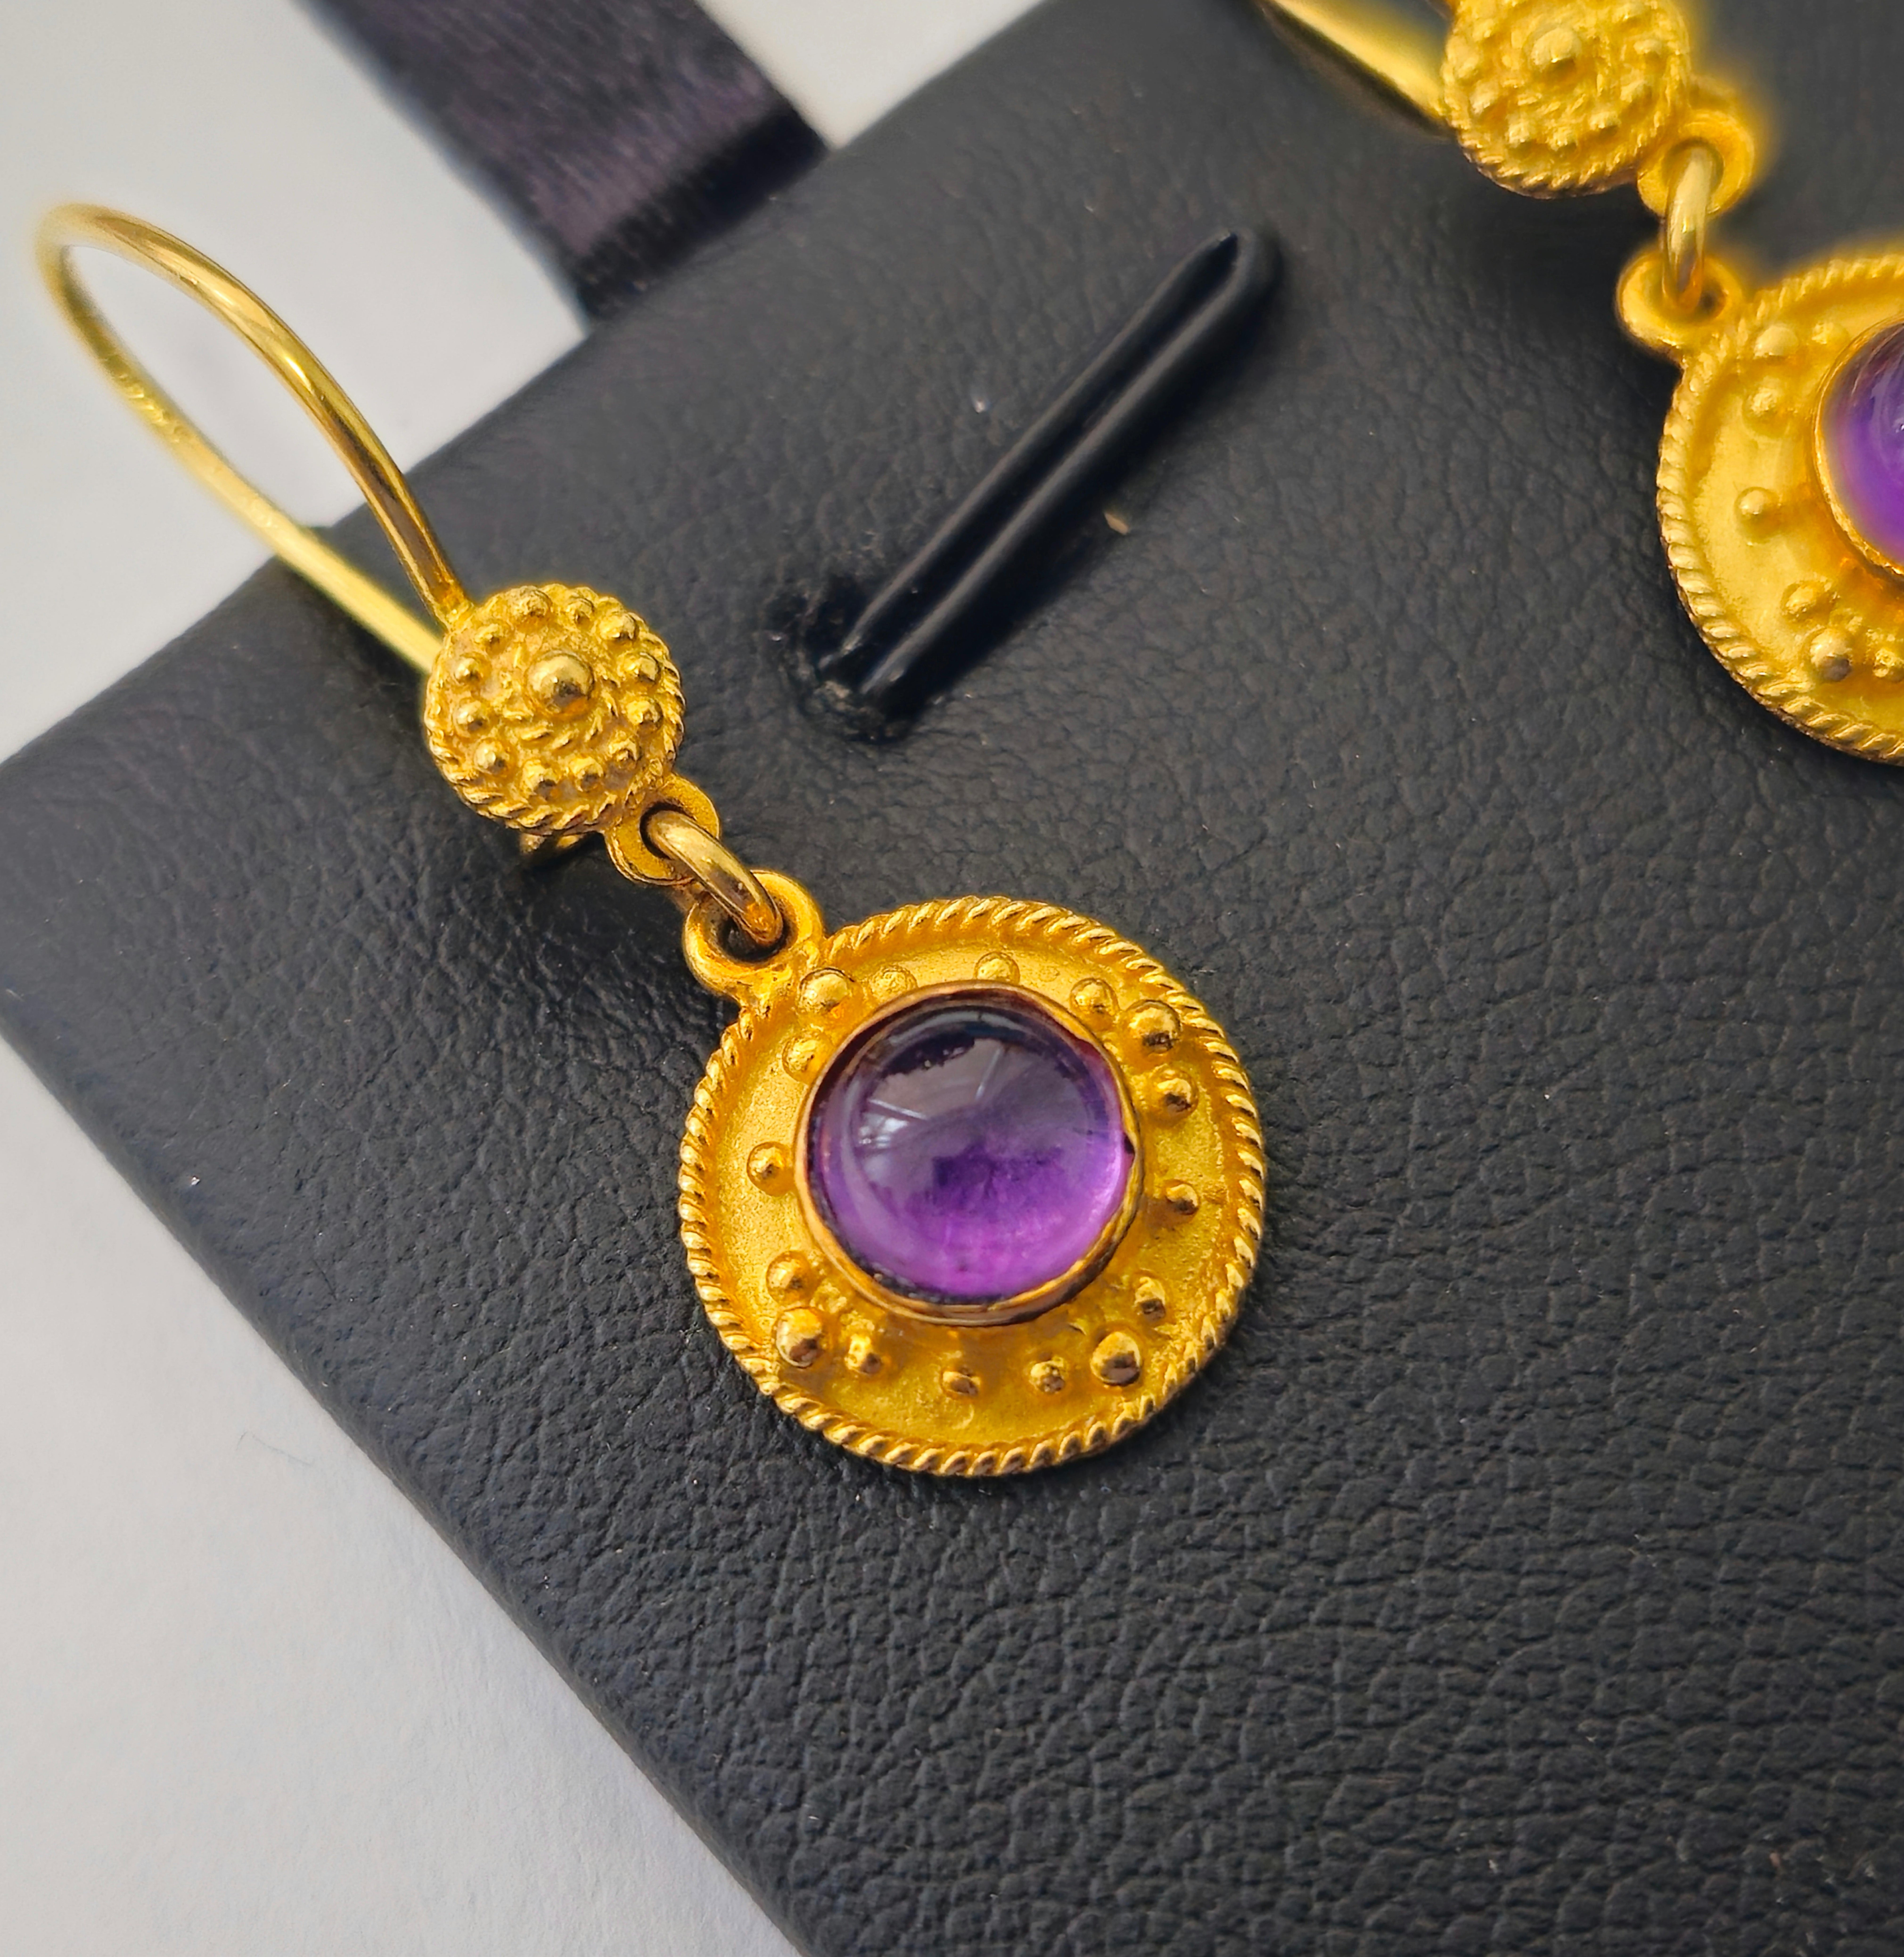 Made from luxurious 18k yellow gold, these mid-century earrings feature mesmerizing amethyst gemstones with a total weight of 2.24 carats, each exhibiting deep saturation and natural earth-mined beauty. The cabochon cut enhances the richness of the